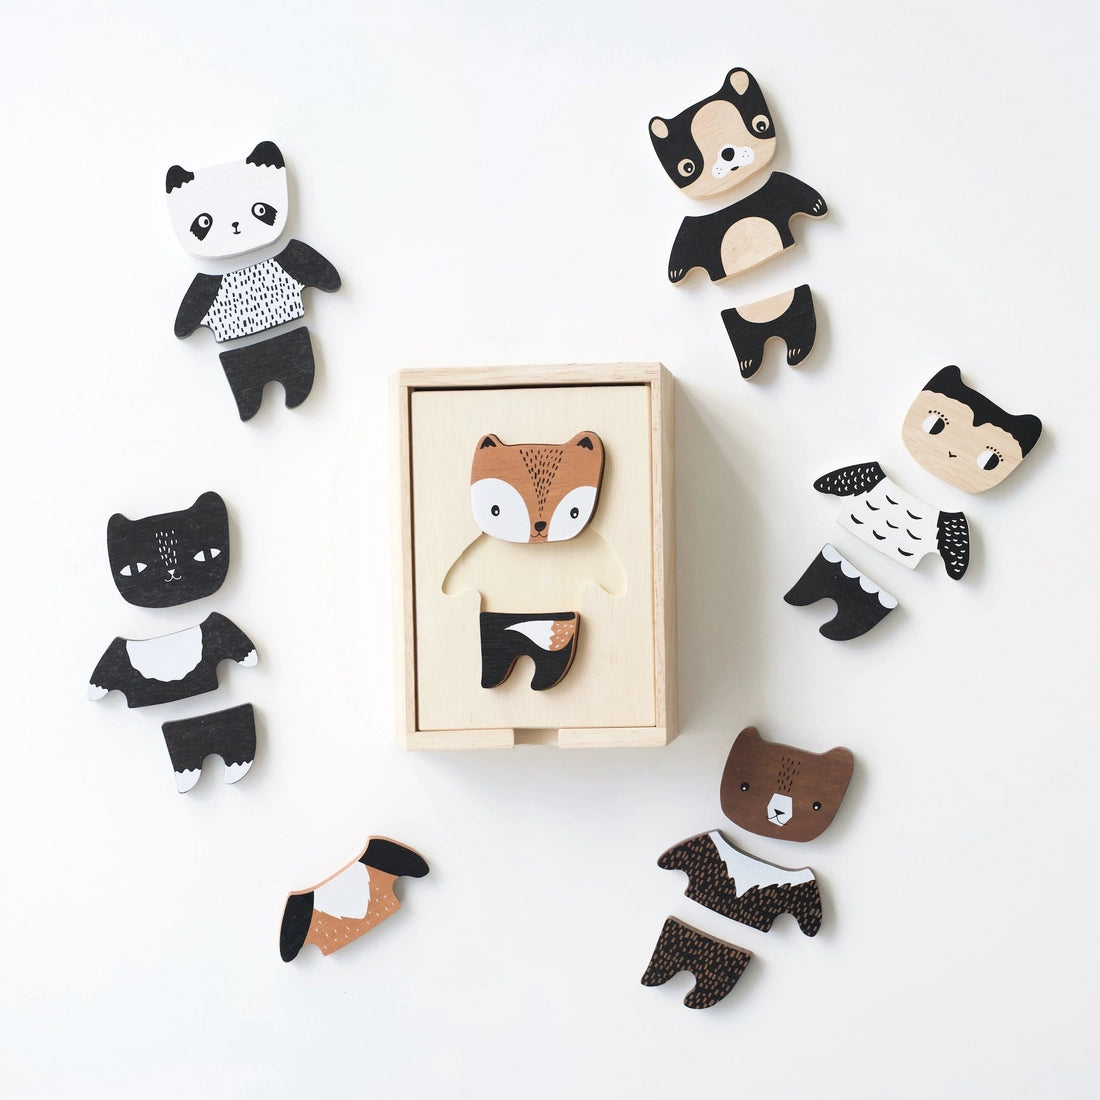 Mix & Match Animal Tiles Wee Gallery